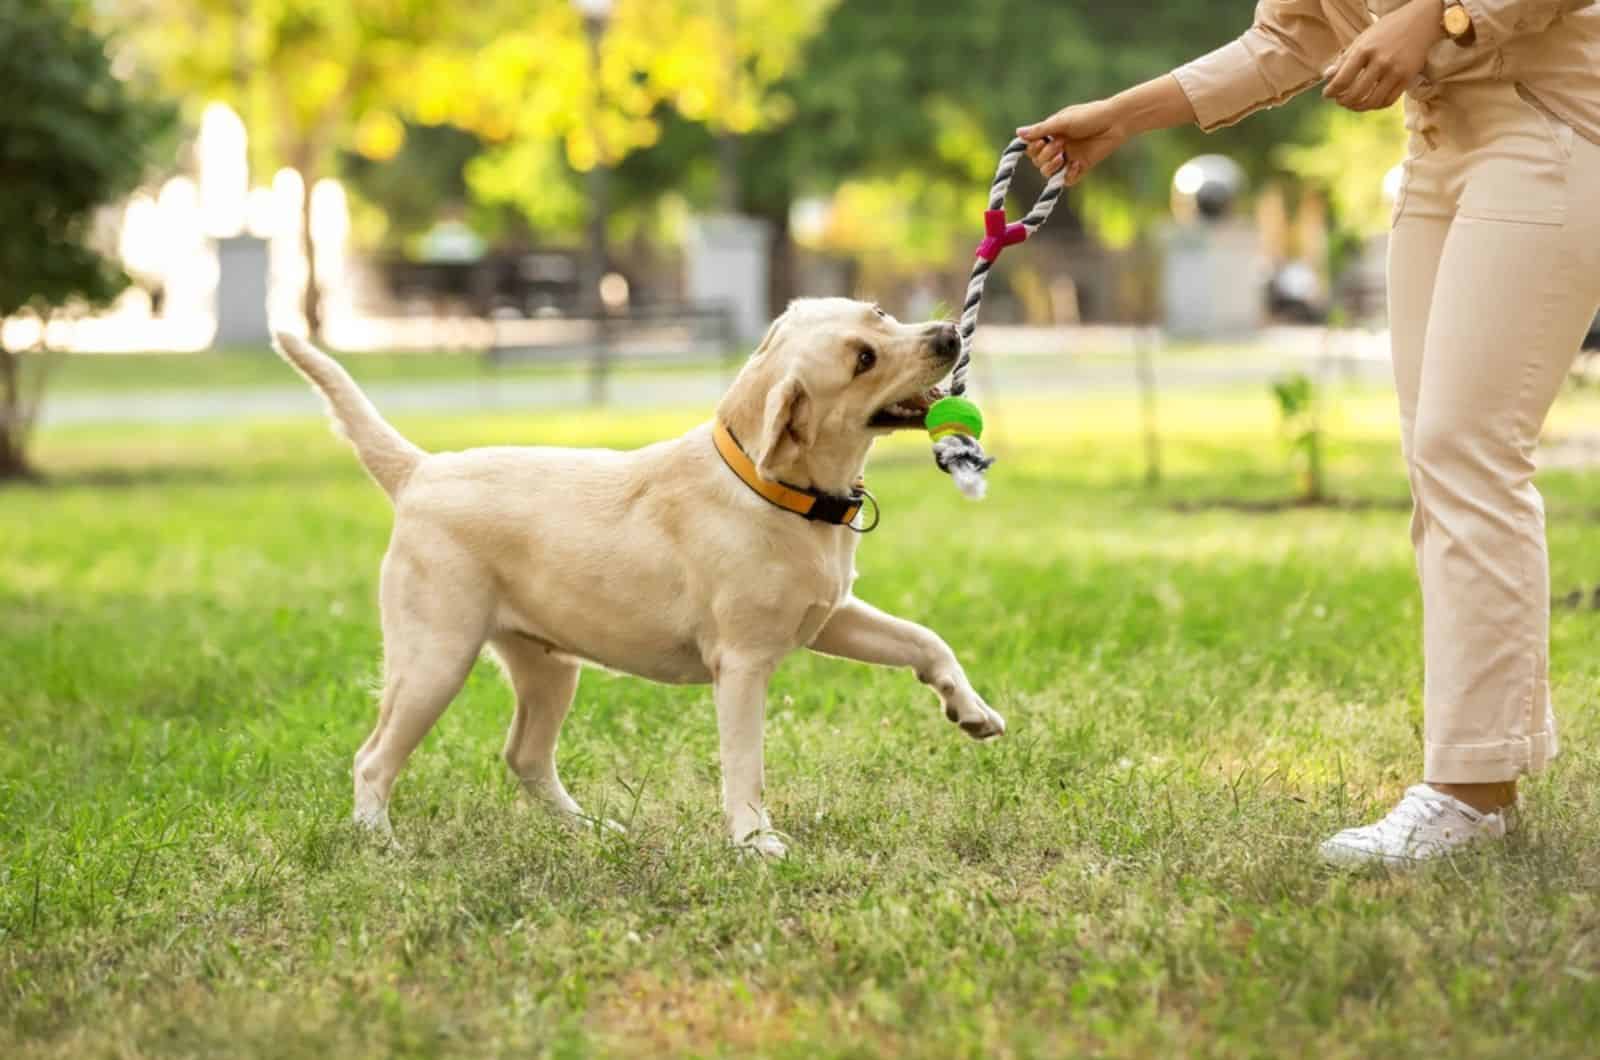 11 Fun Activities To Do With Your Dog, Indoors And Outdoors